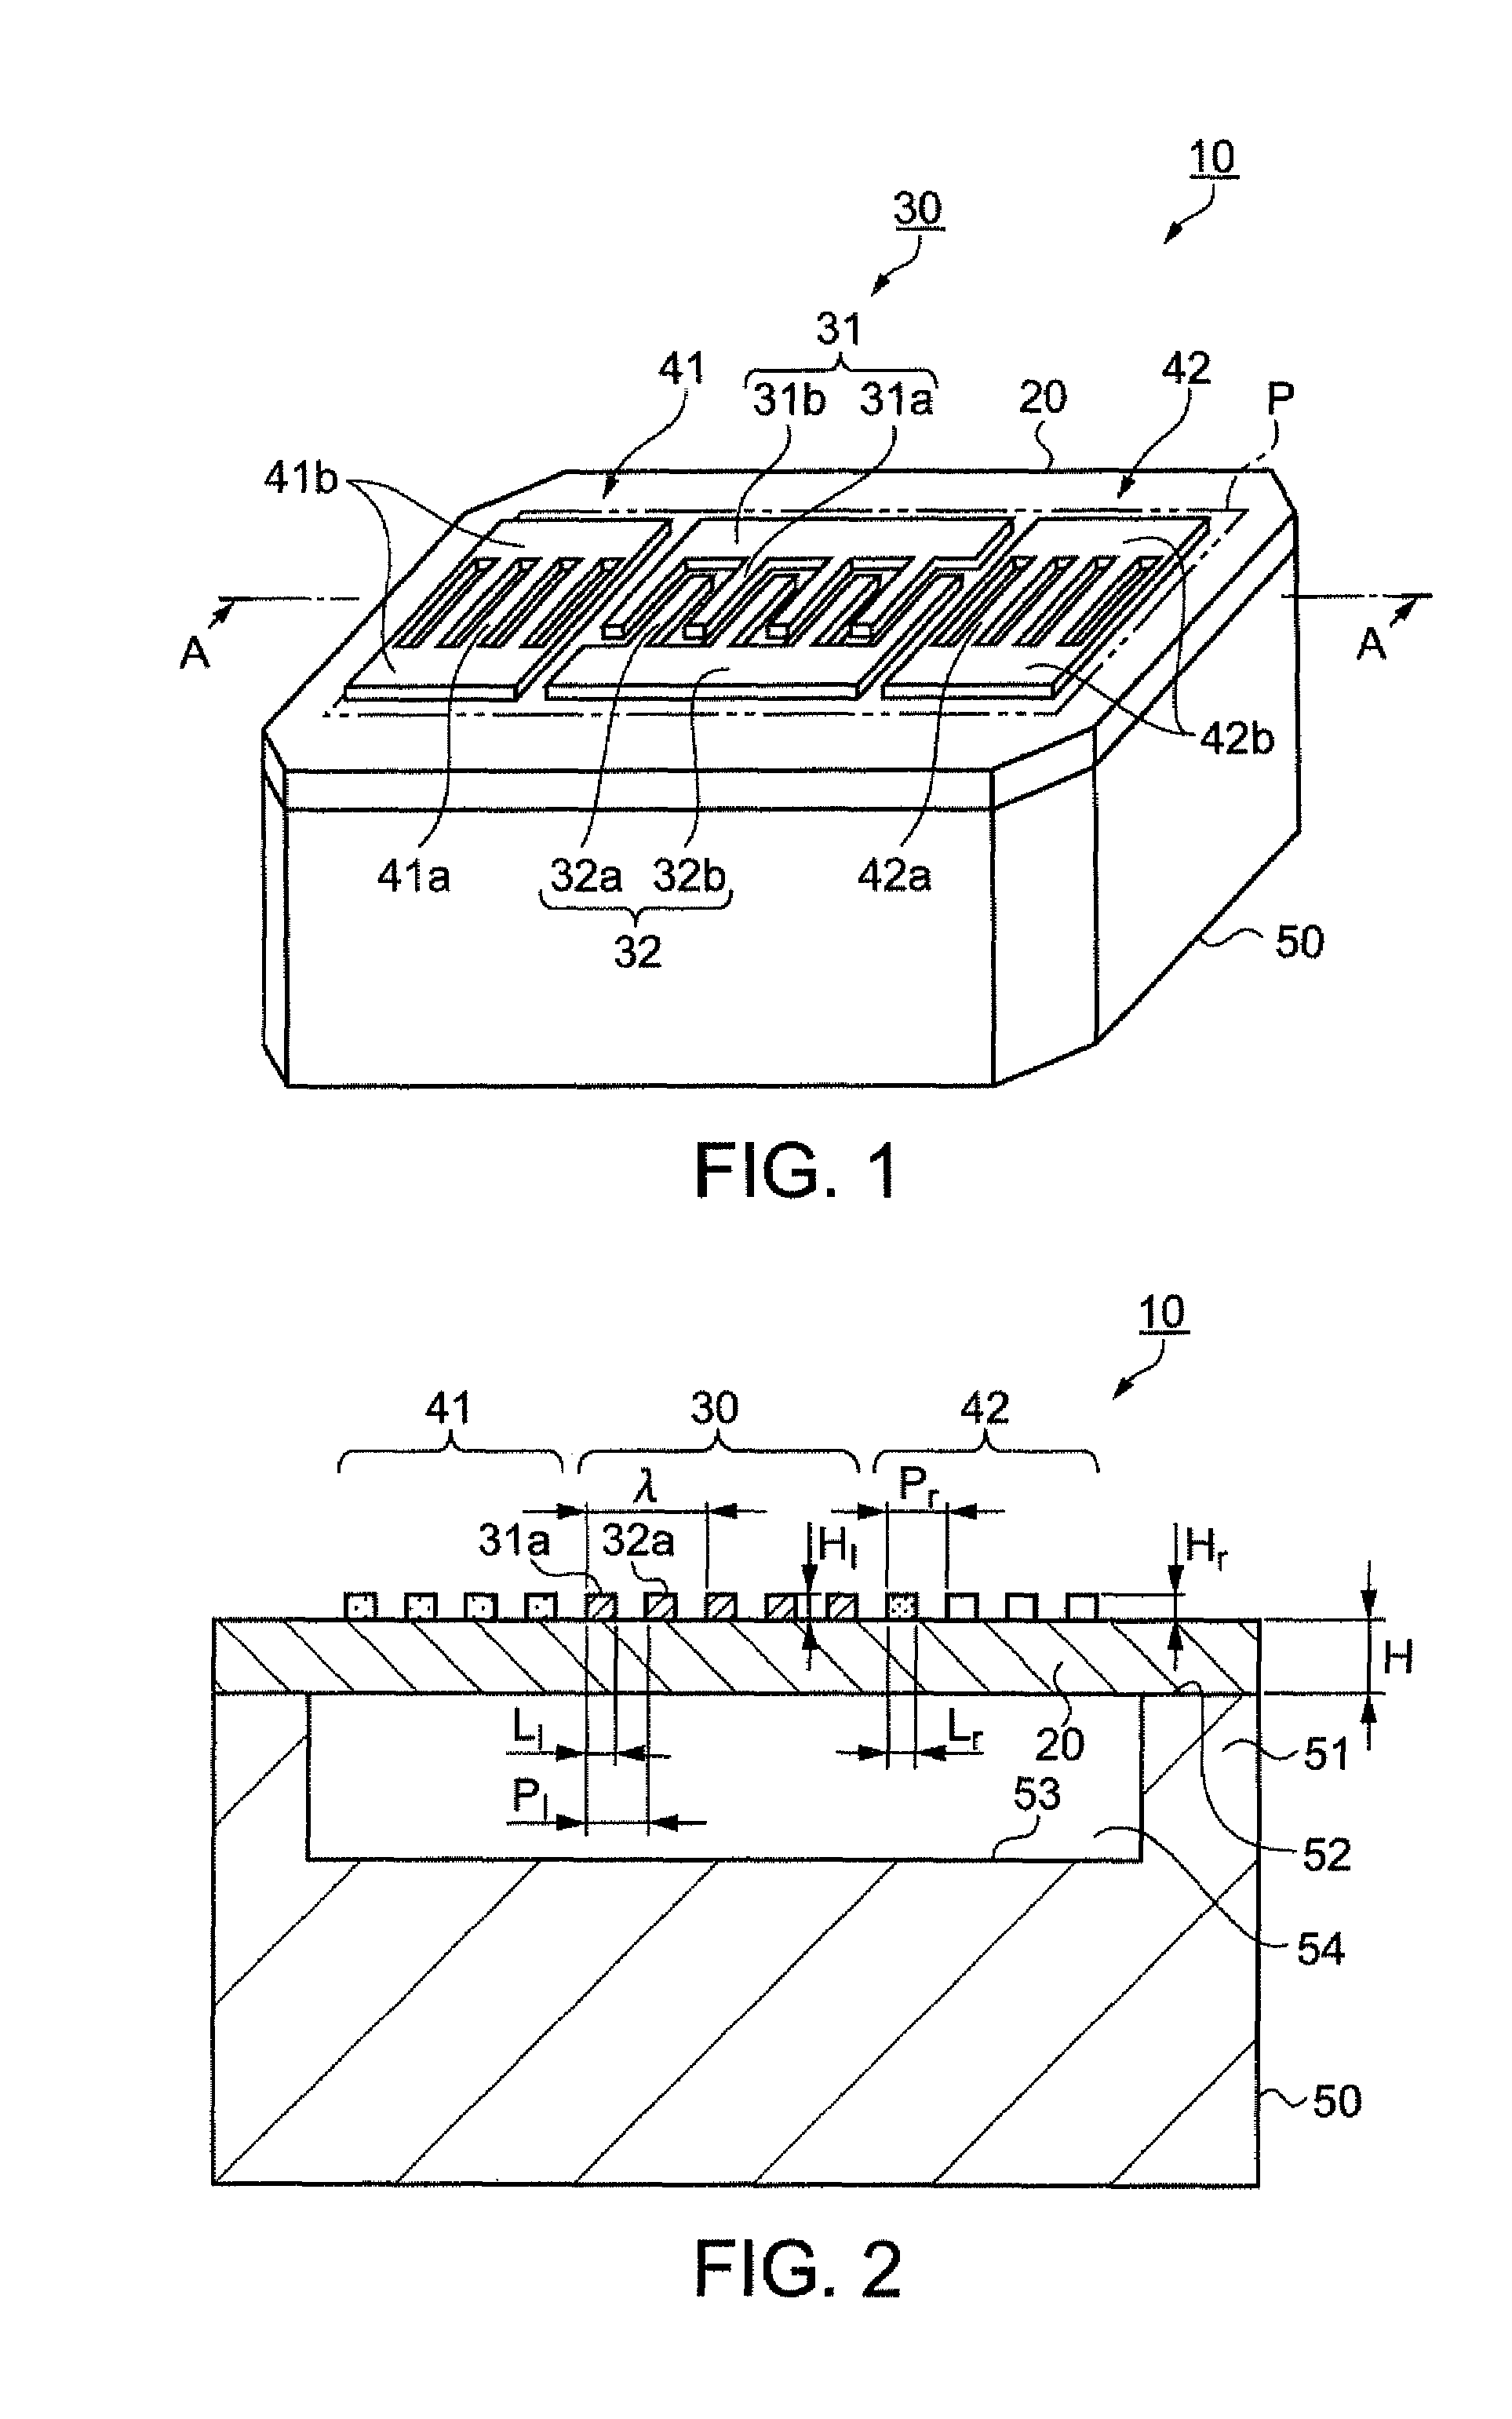 Lamb wave type frequency device and method thereof